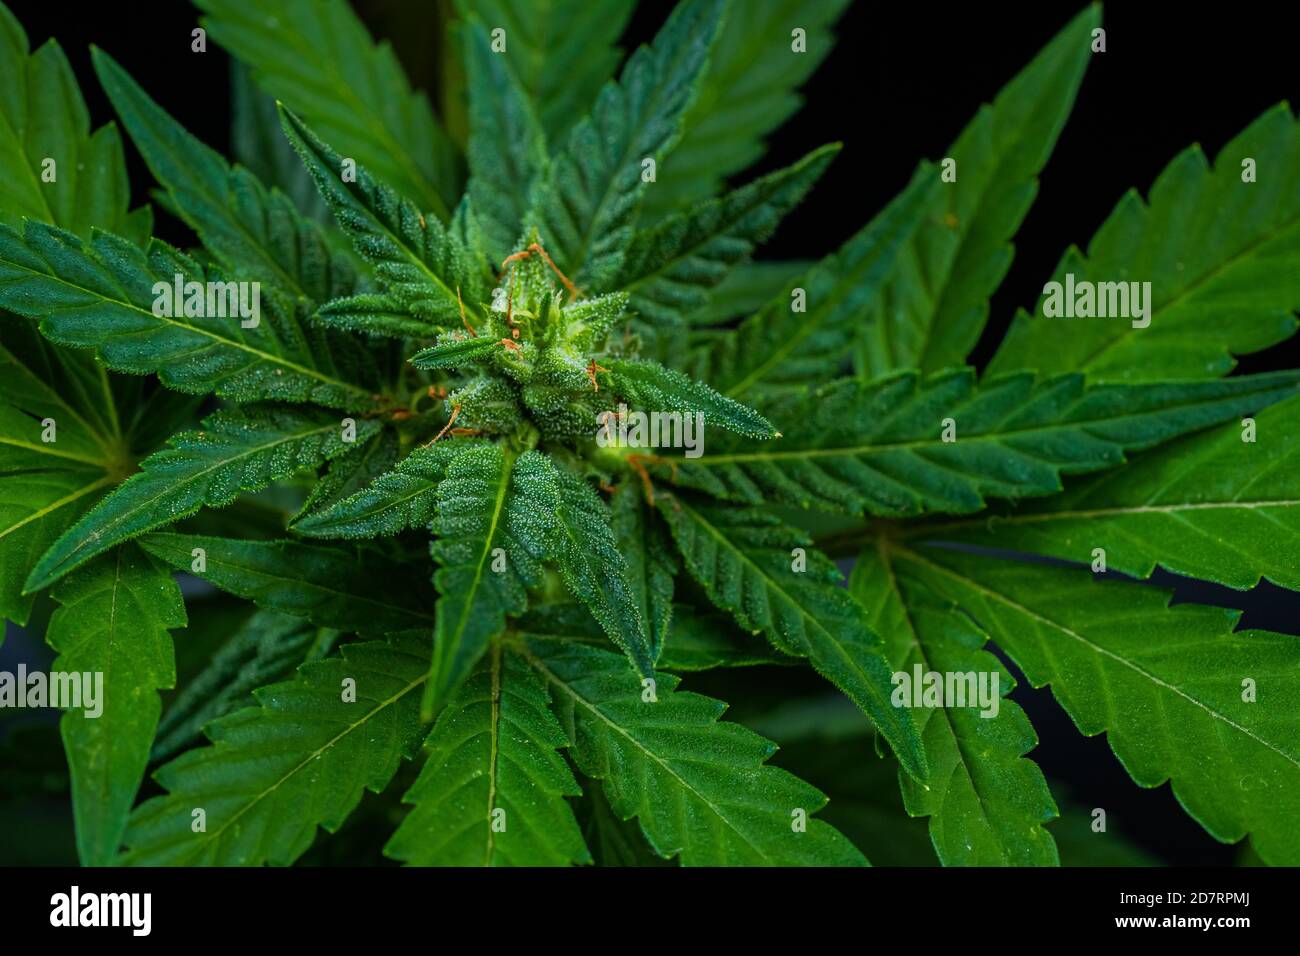 Isolated Sativa Marijuana Plant Close Up On Black Background Rasterized Cannabis Leaf Close Up Hemp Cultivation At Home Illegal Activities Stock Photo Alamy